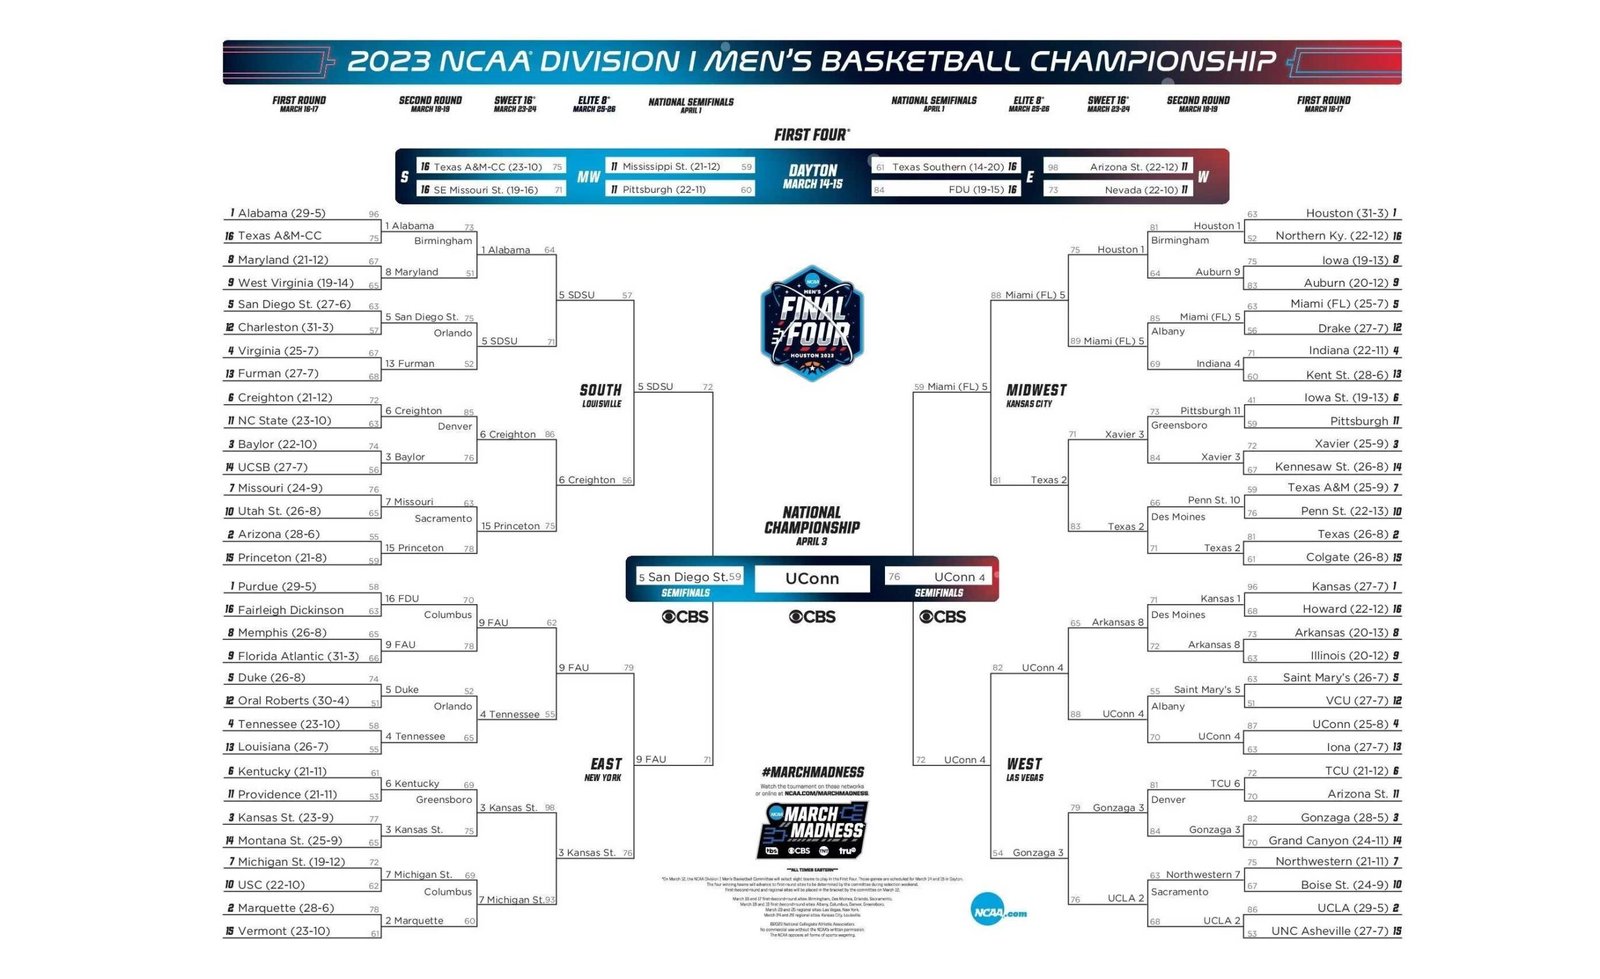 March Madness rounds: